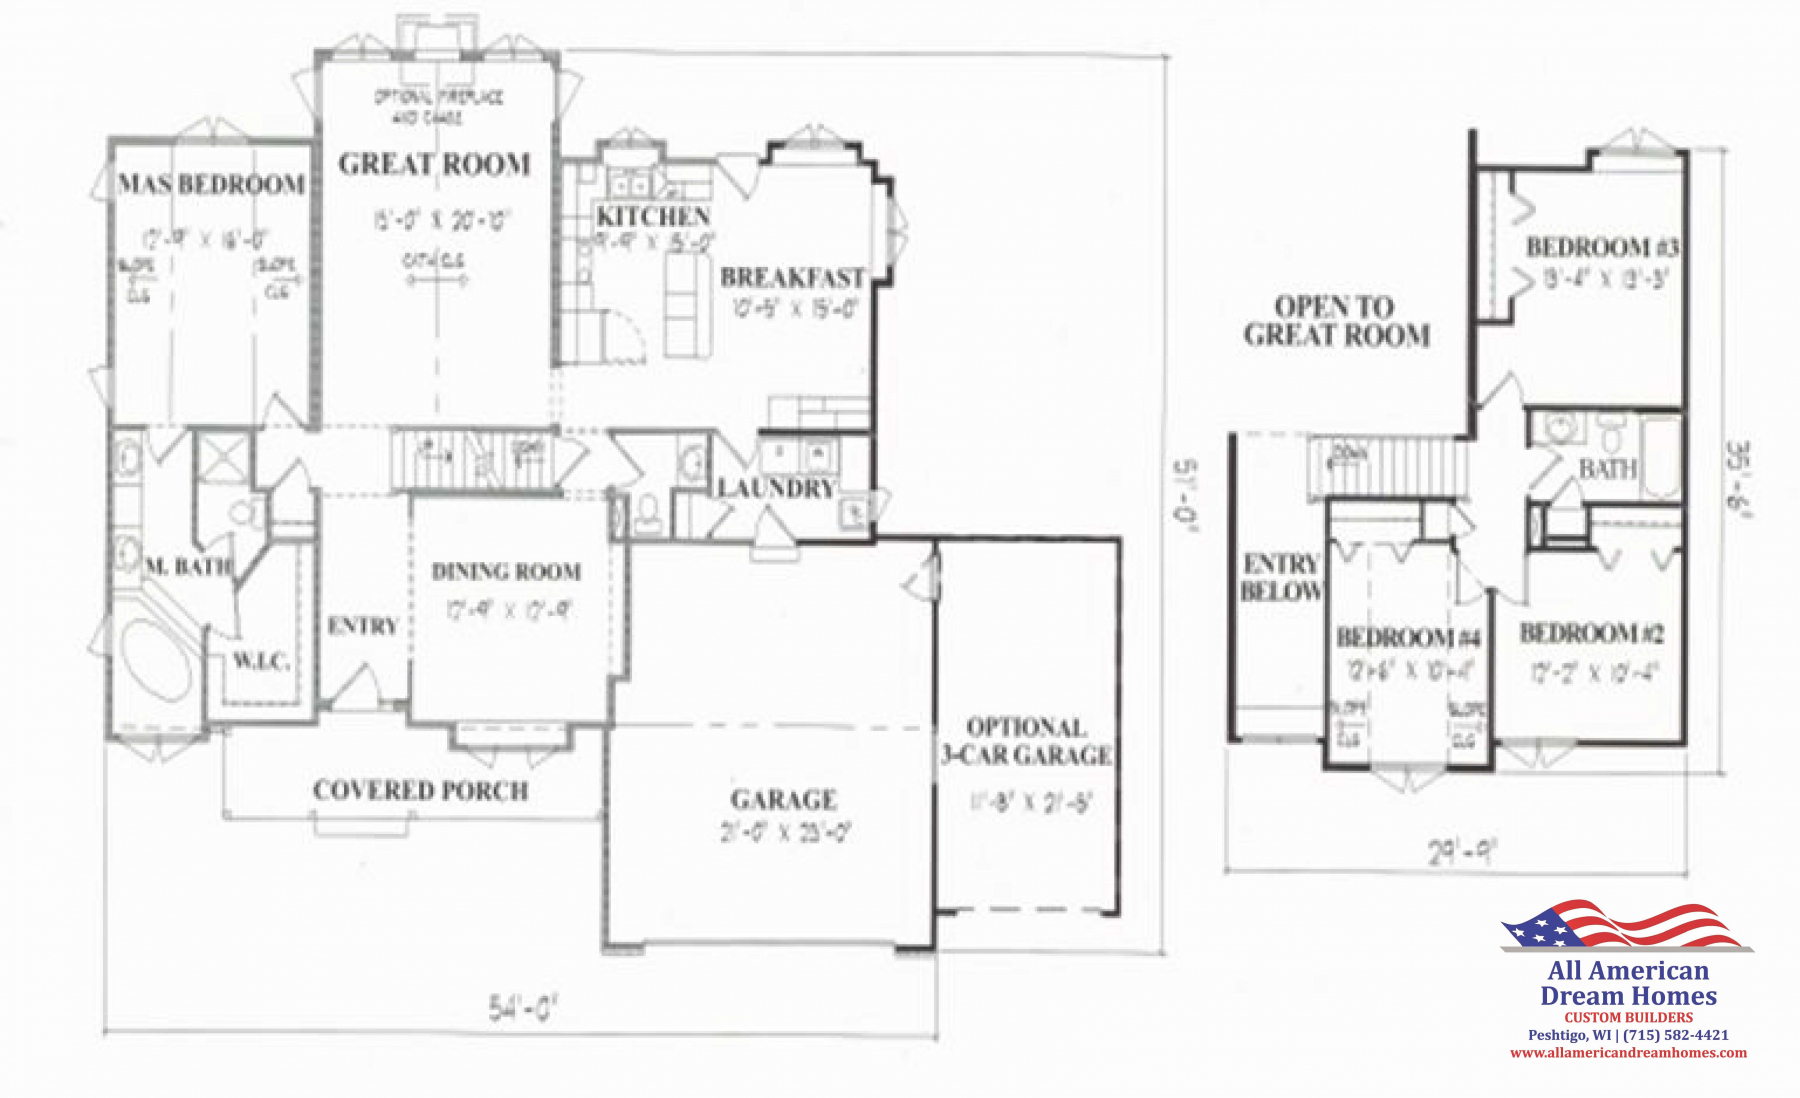 AAA-TWO-STORY-406-INDEPENDENCE-FLOORPLAN-2185-SQ-FT